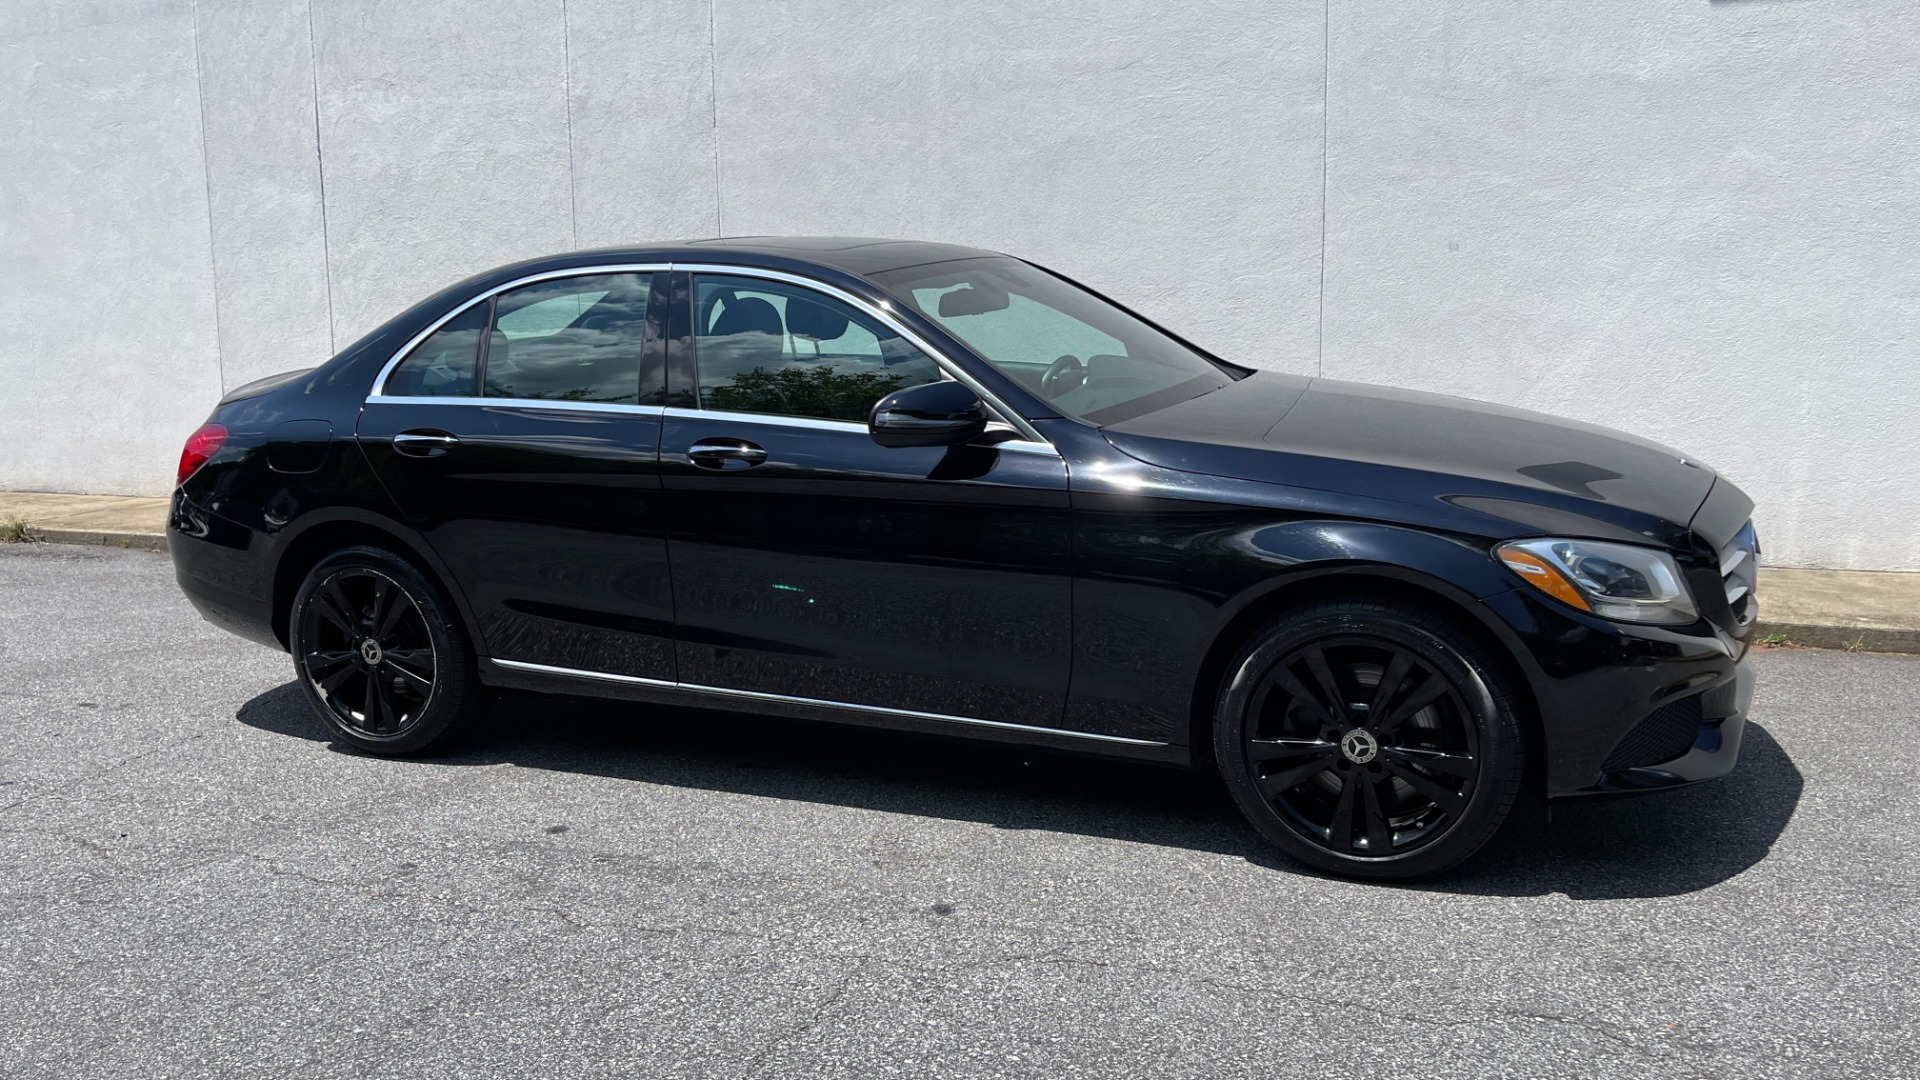 Used 2018 Mercedes-Benz C-Class C 300 / PREMIUM / REVIEW CAM / HTD SEATS / 18IN WHEELS for sale $27,999 at Formula Imports in Charlotte NC 28227 2